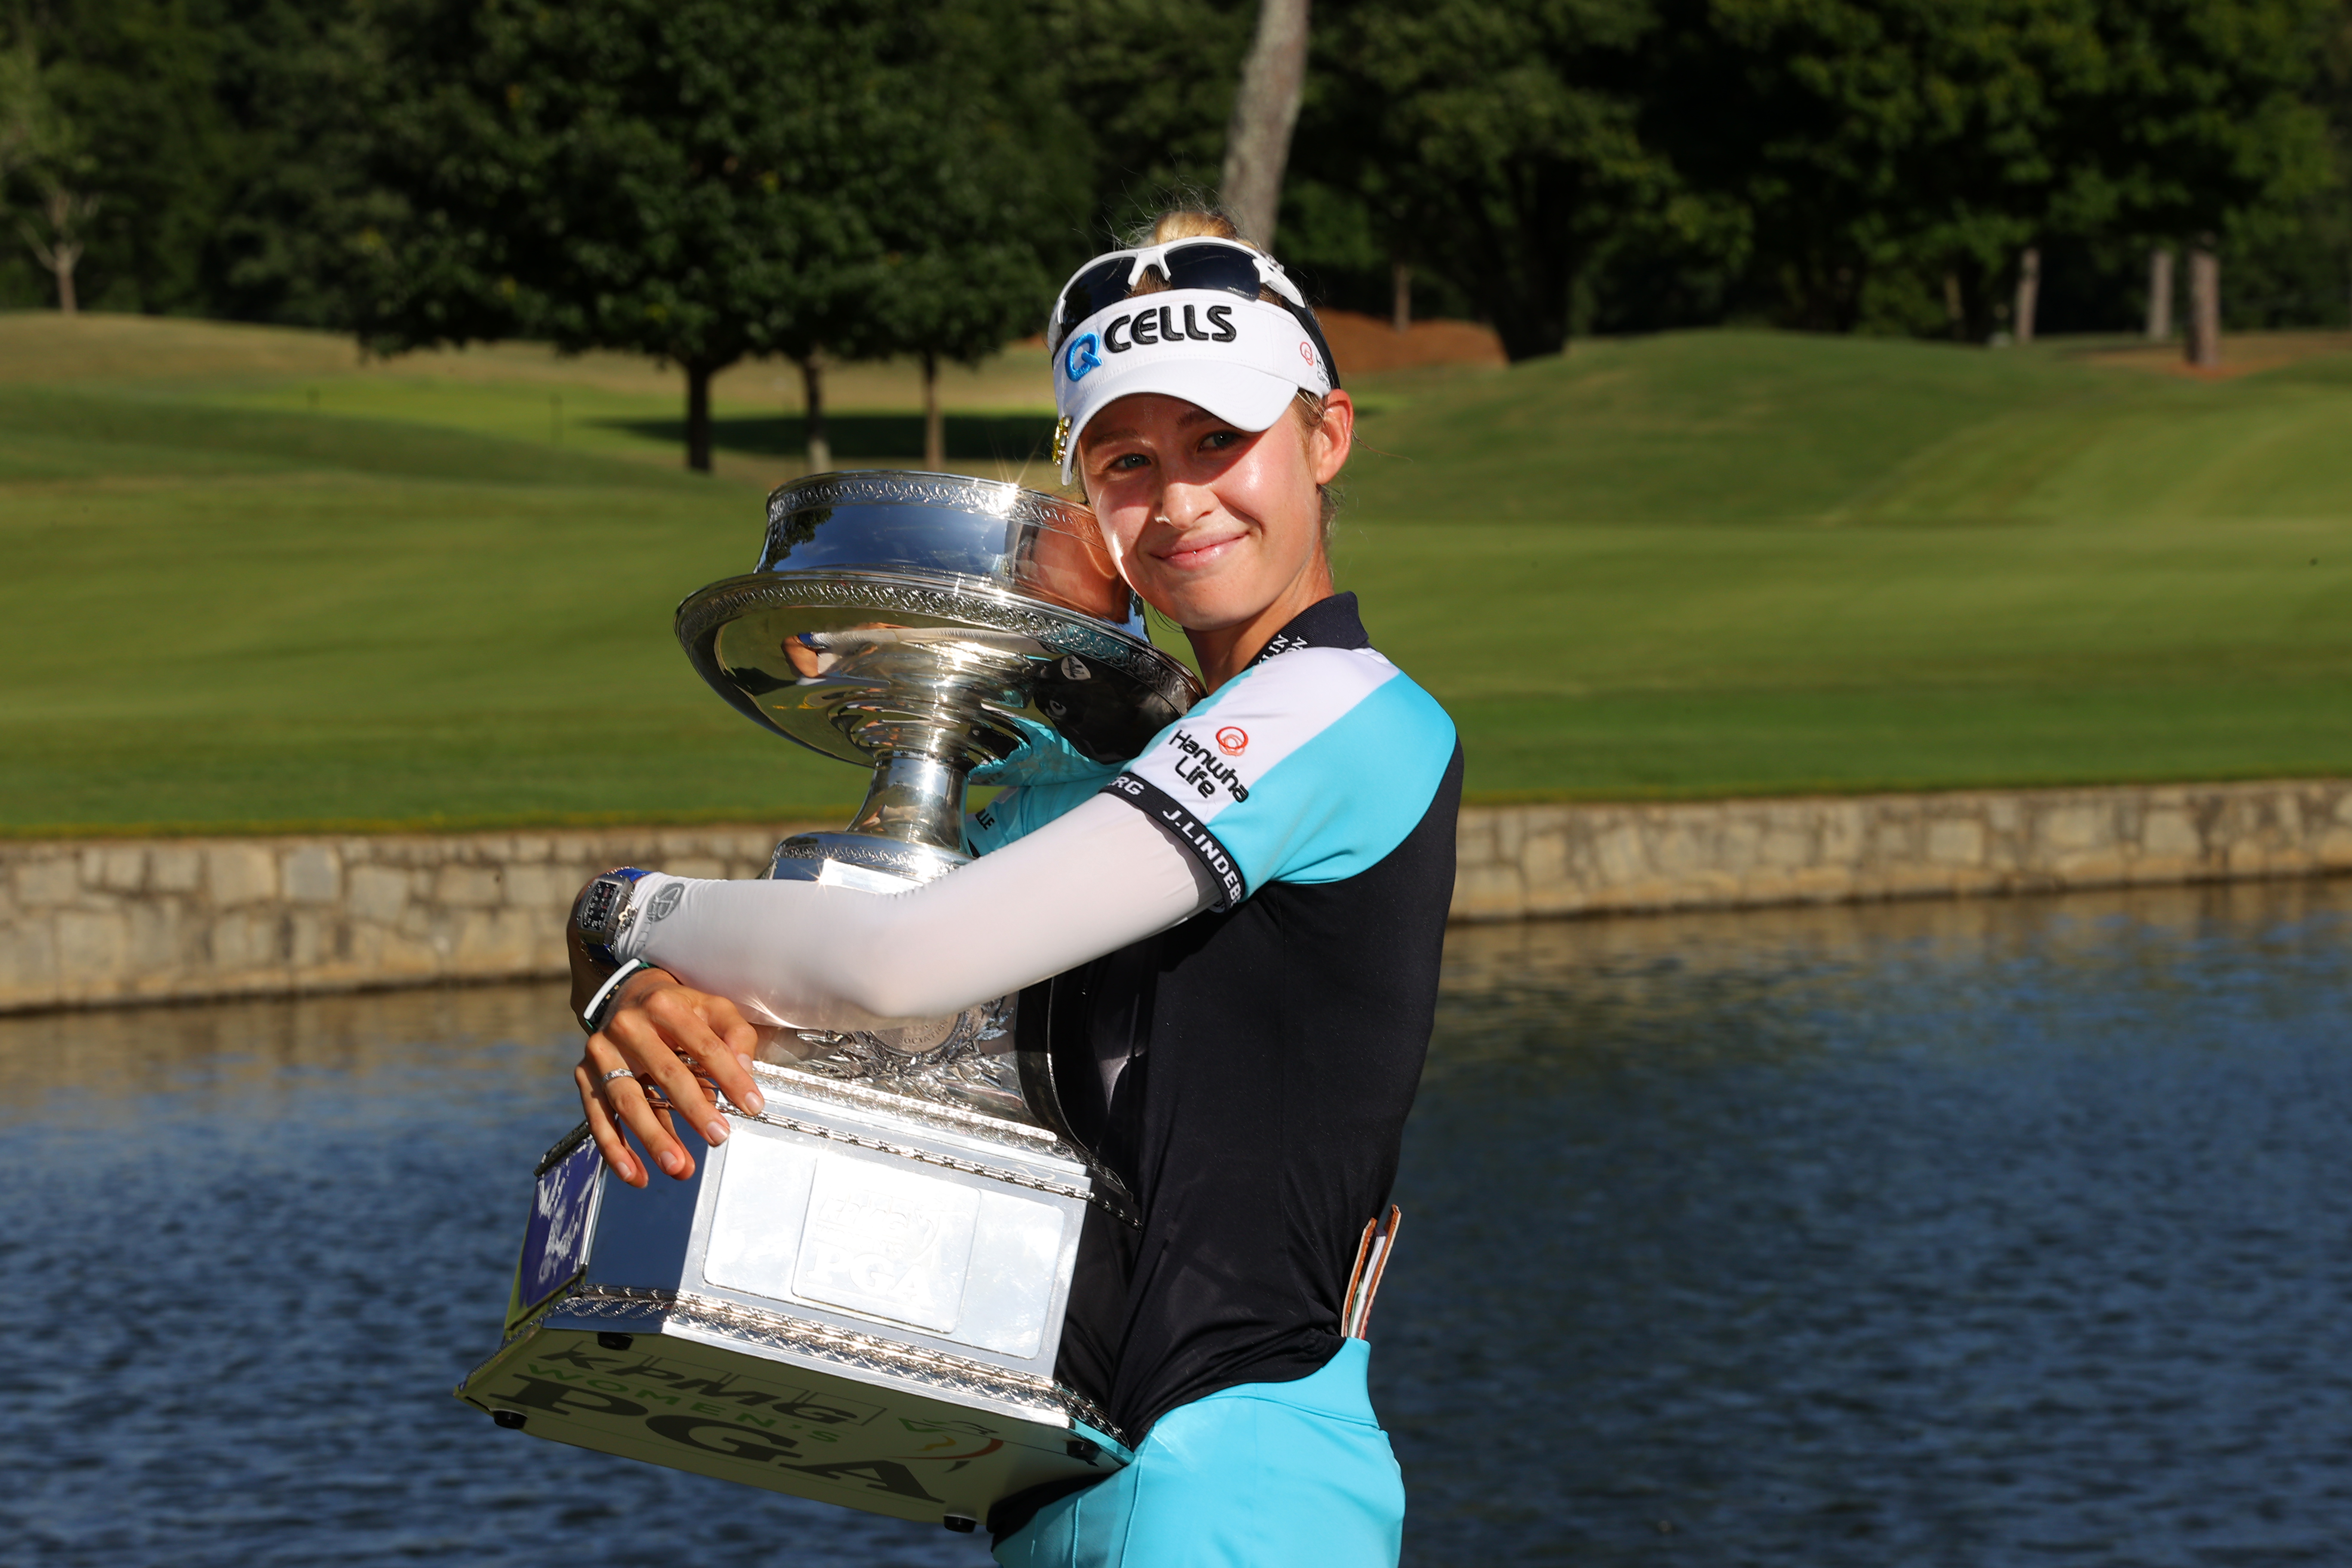 Is Nelly Korda Still the World Number 1? An Exploration of Her Current  Status and Journey to the Top